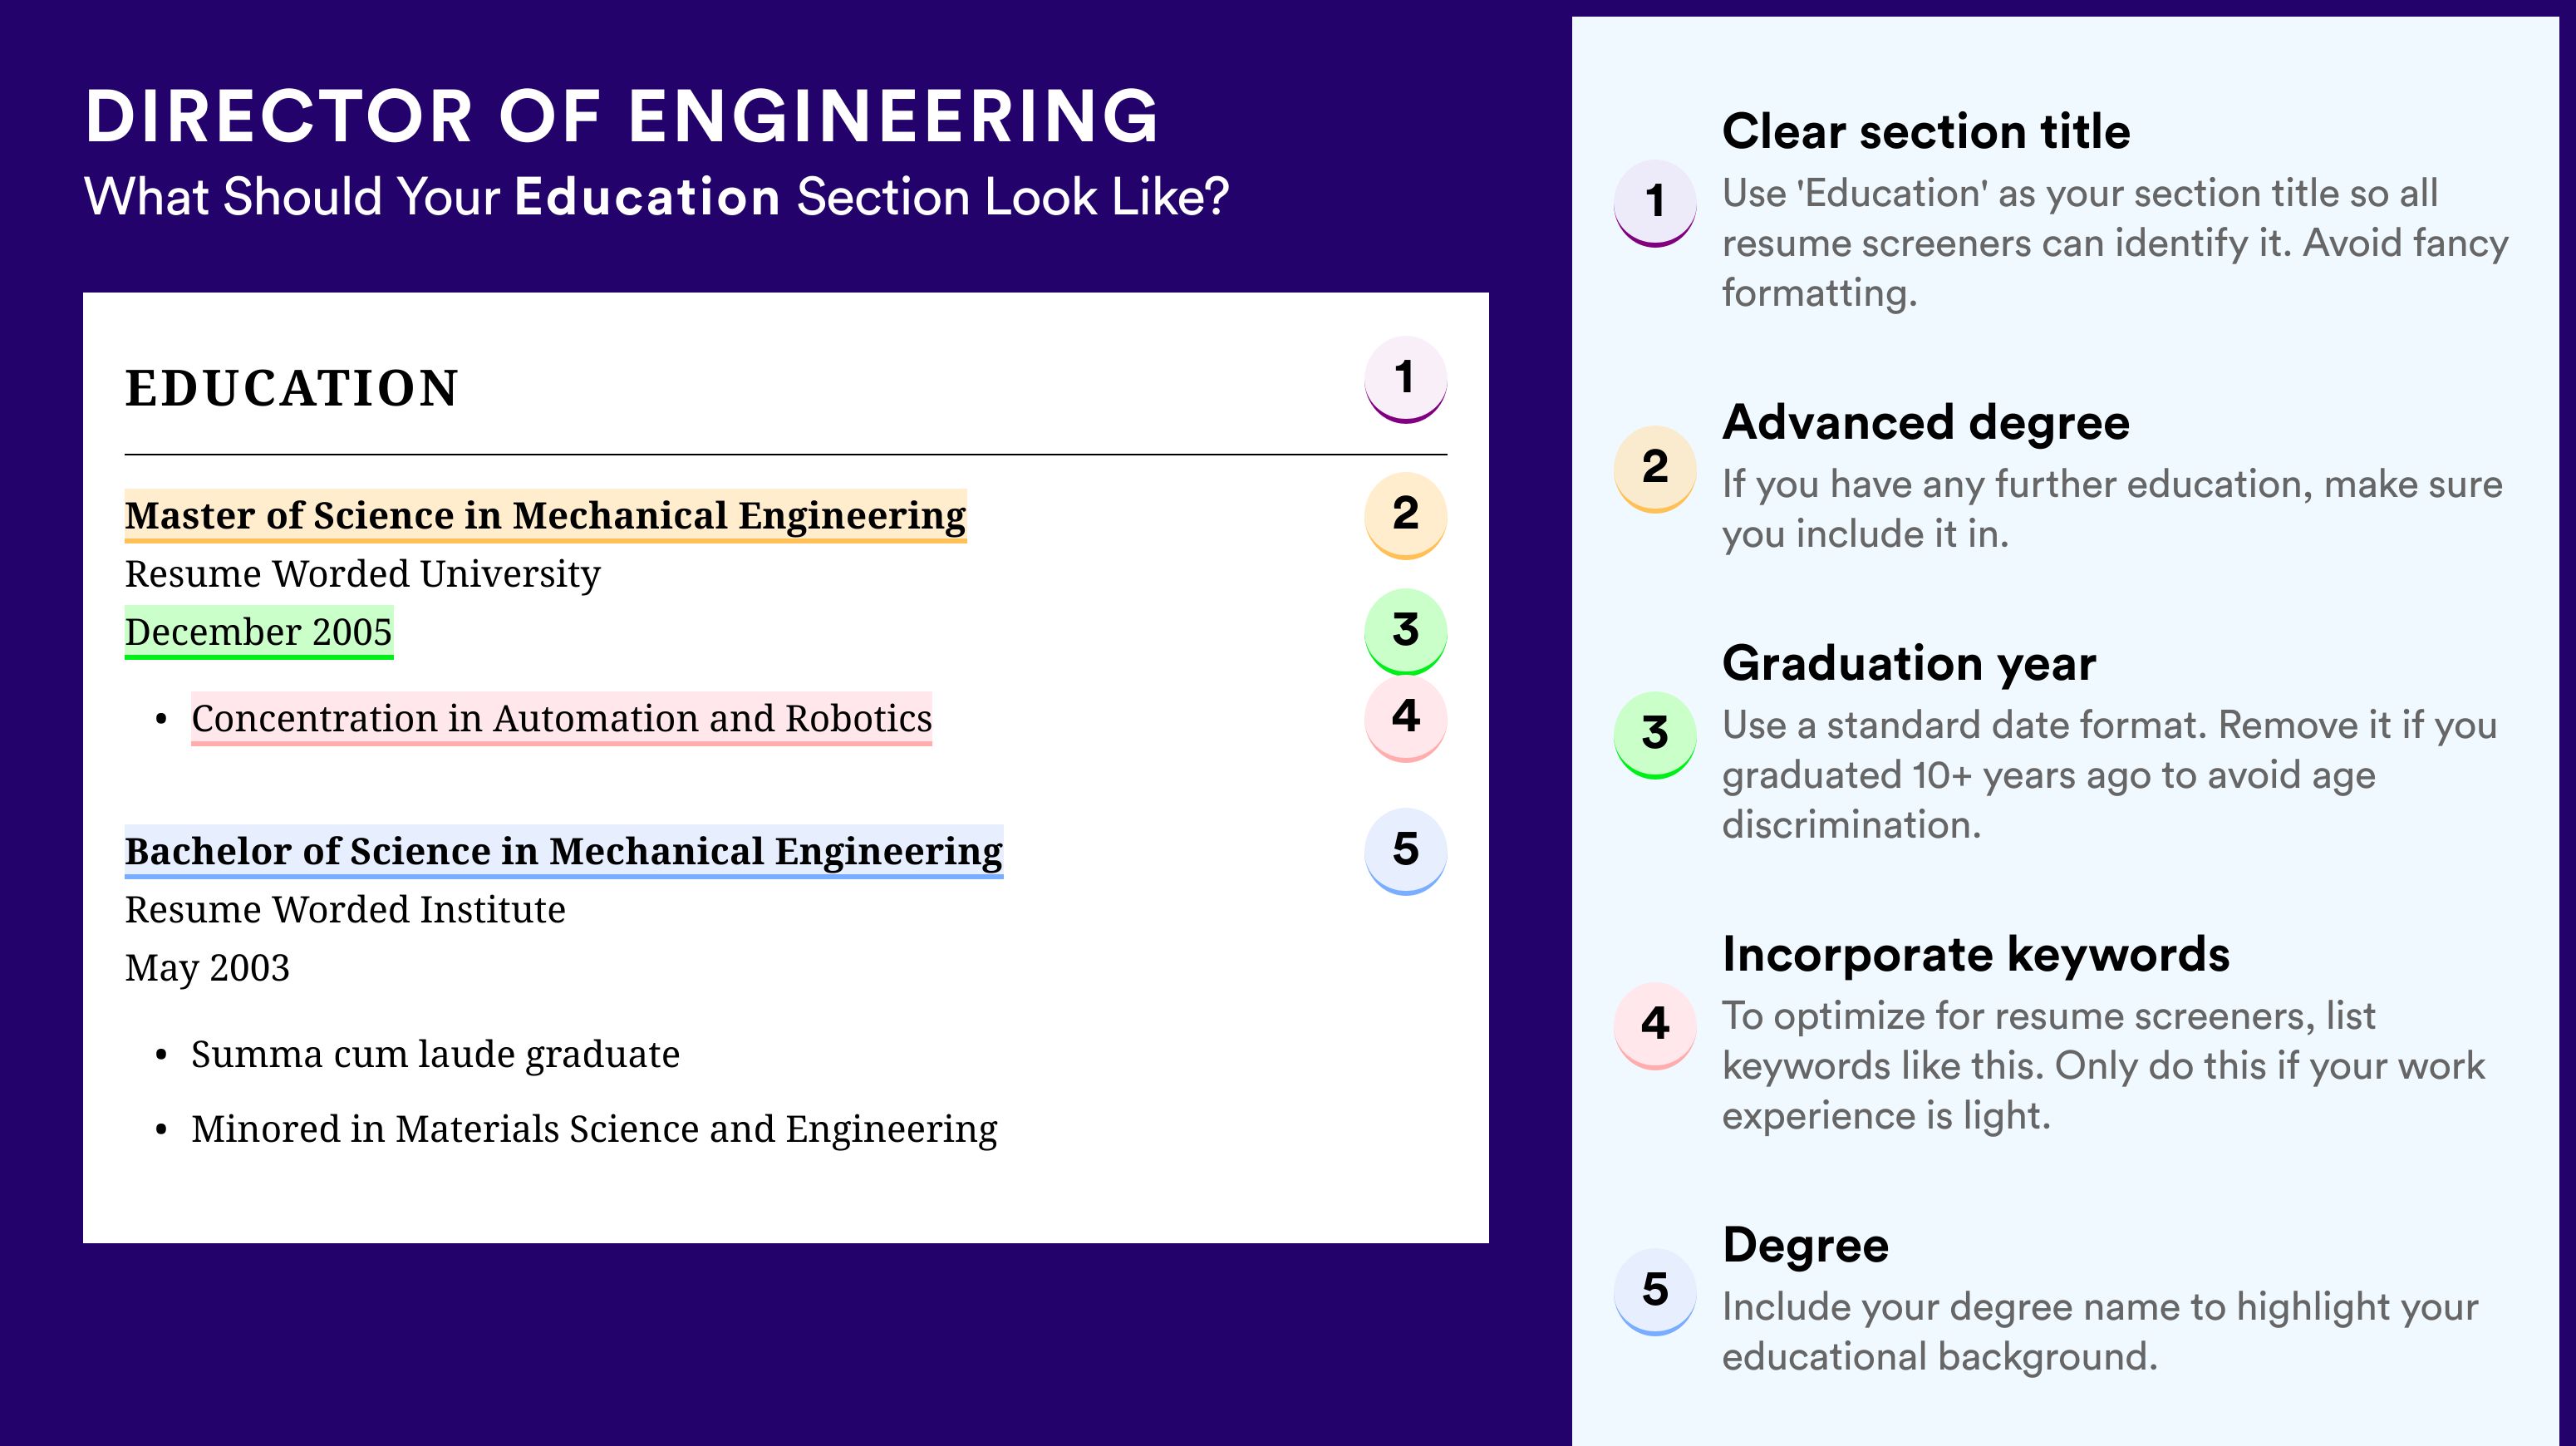 How To Write An Education Section - Director of Engineering Roles